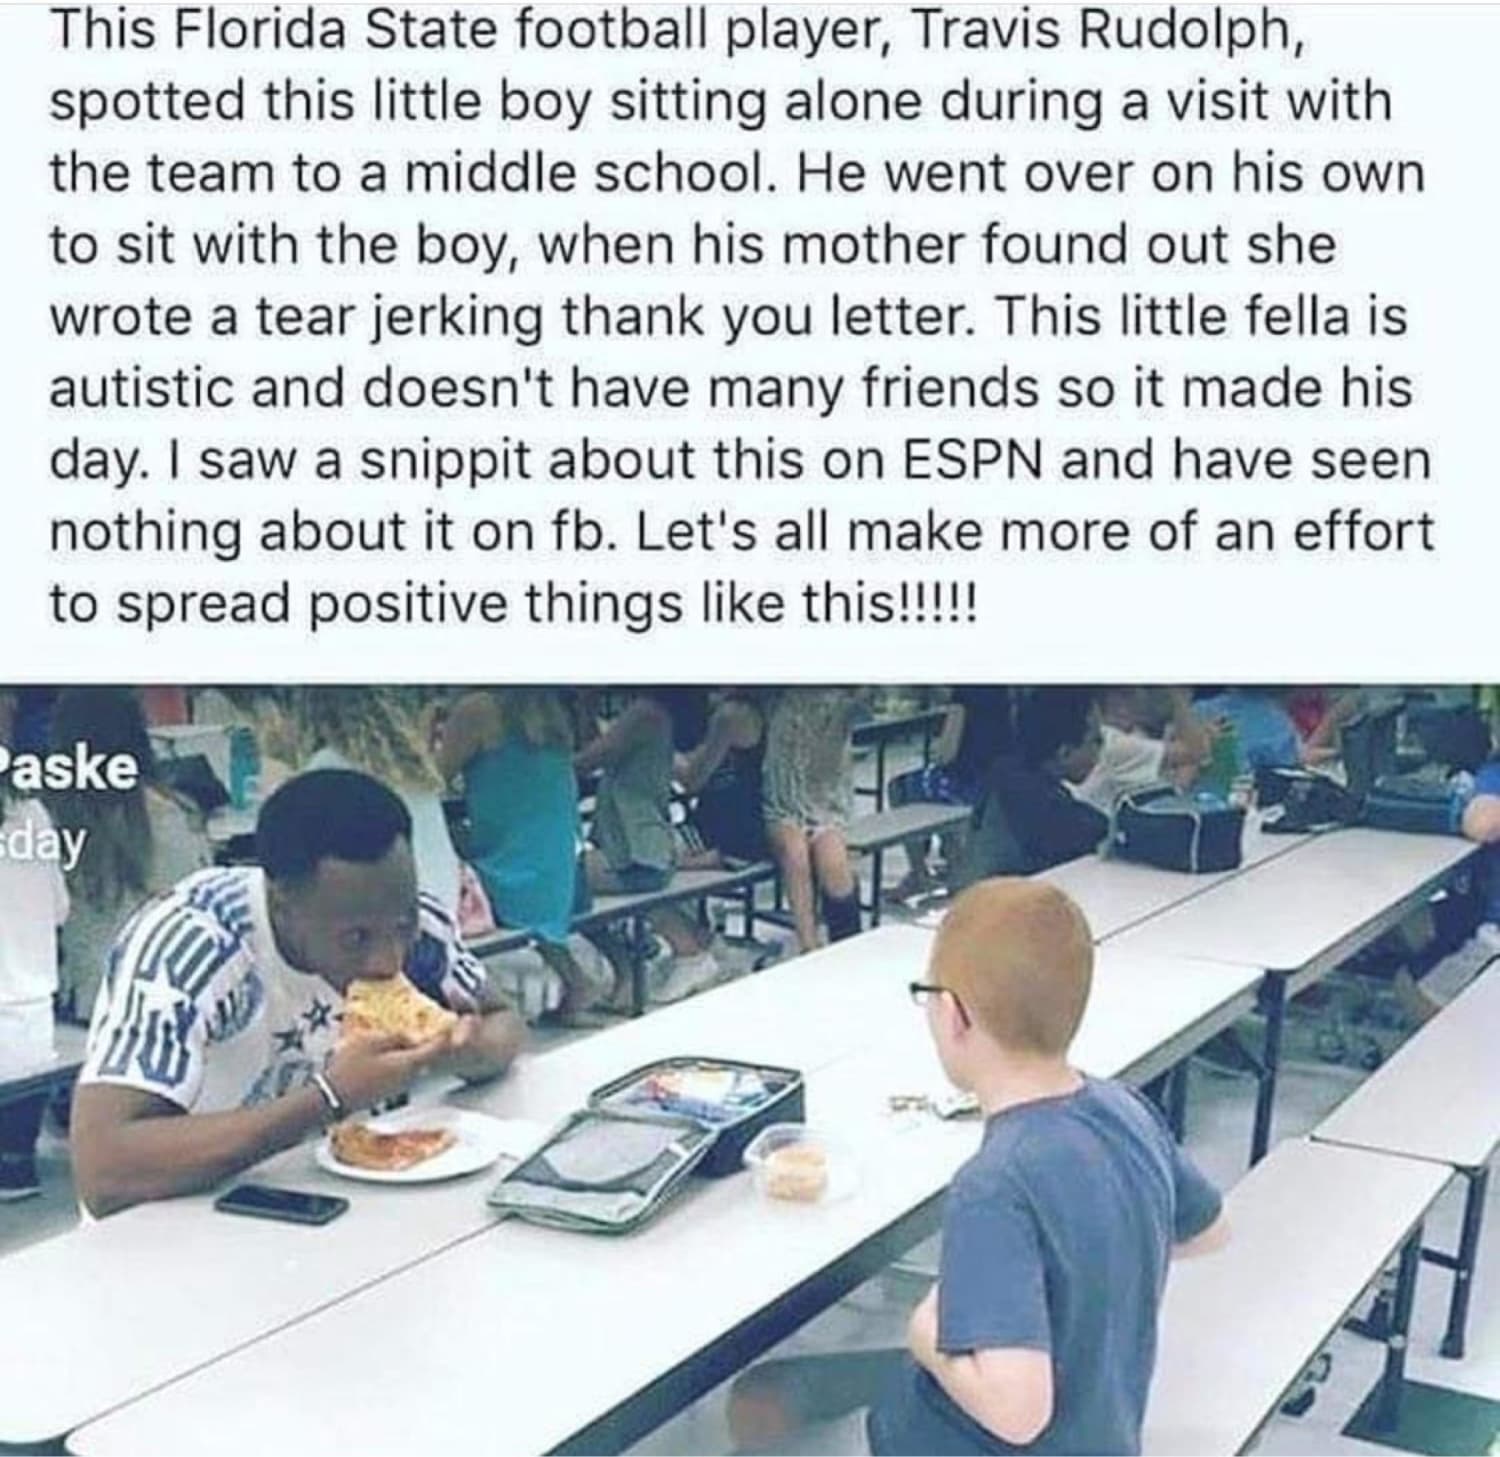 Football player making the world a better place